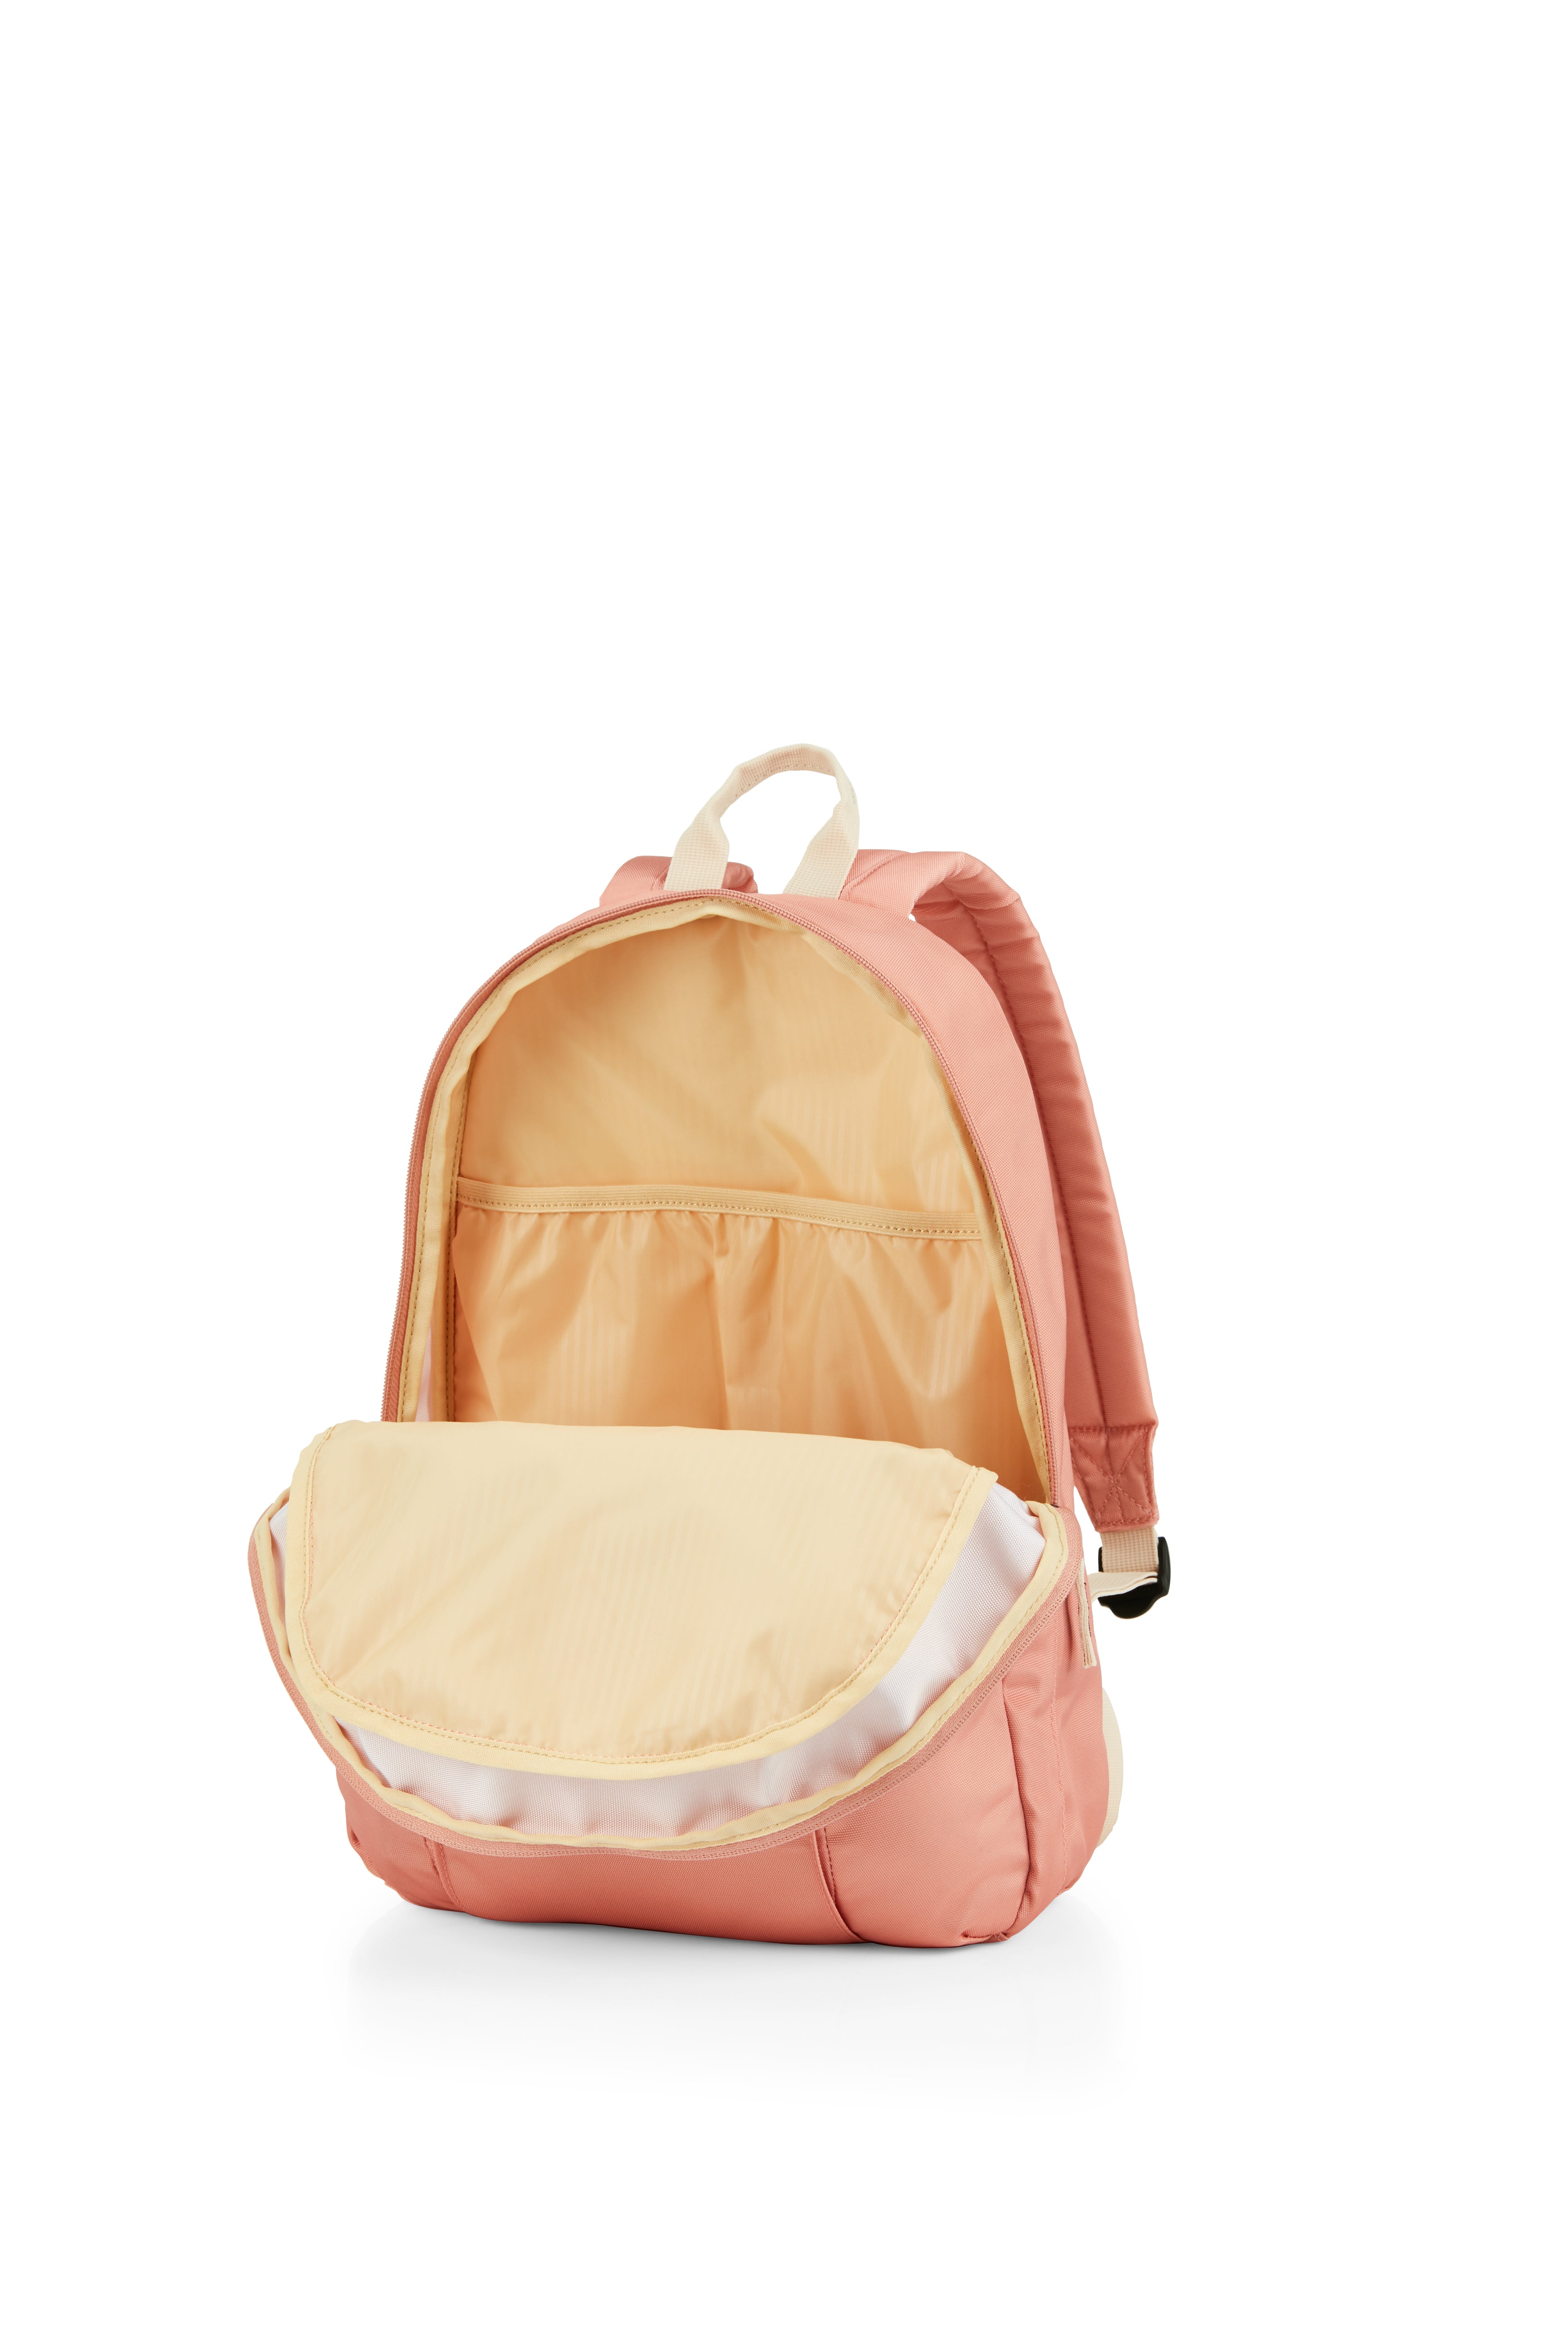 American Tourister - RUDY Small Fashion Backpack - Apricot Ice-6